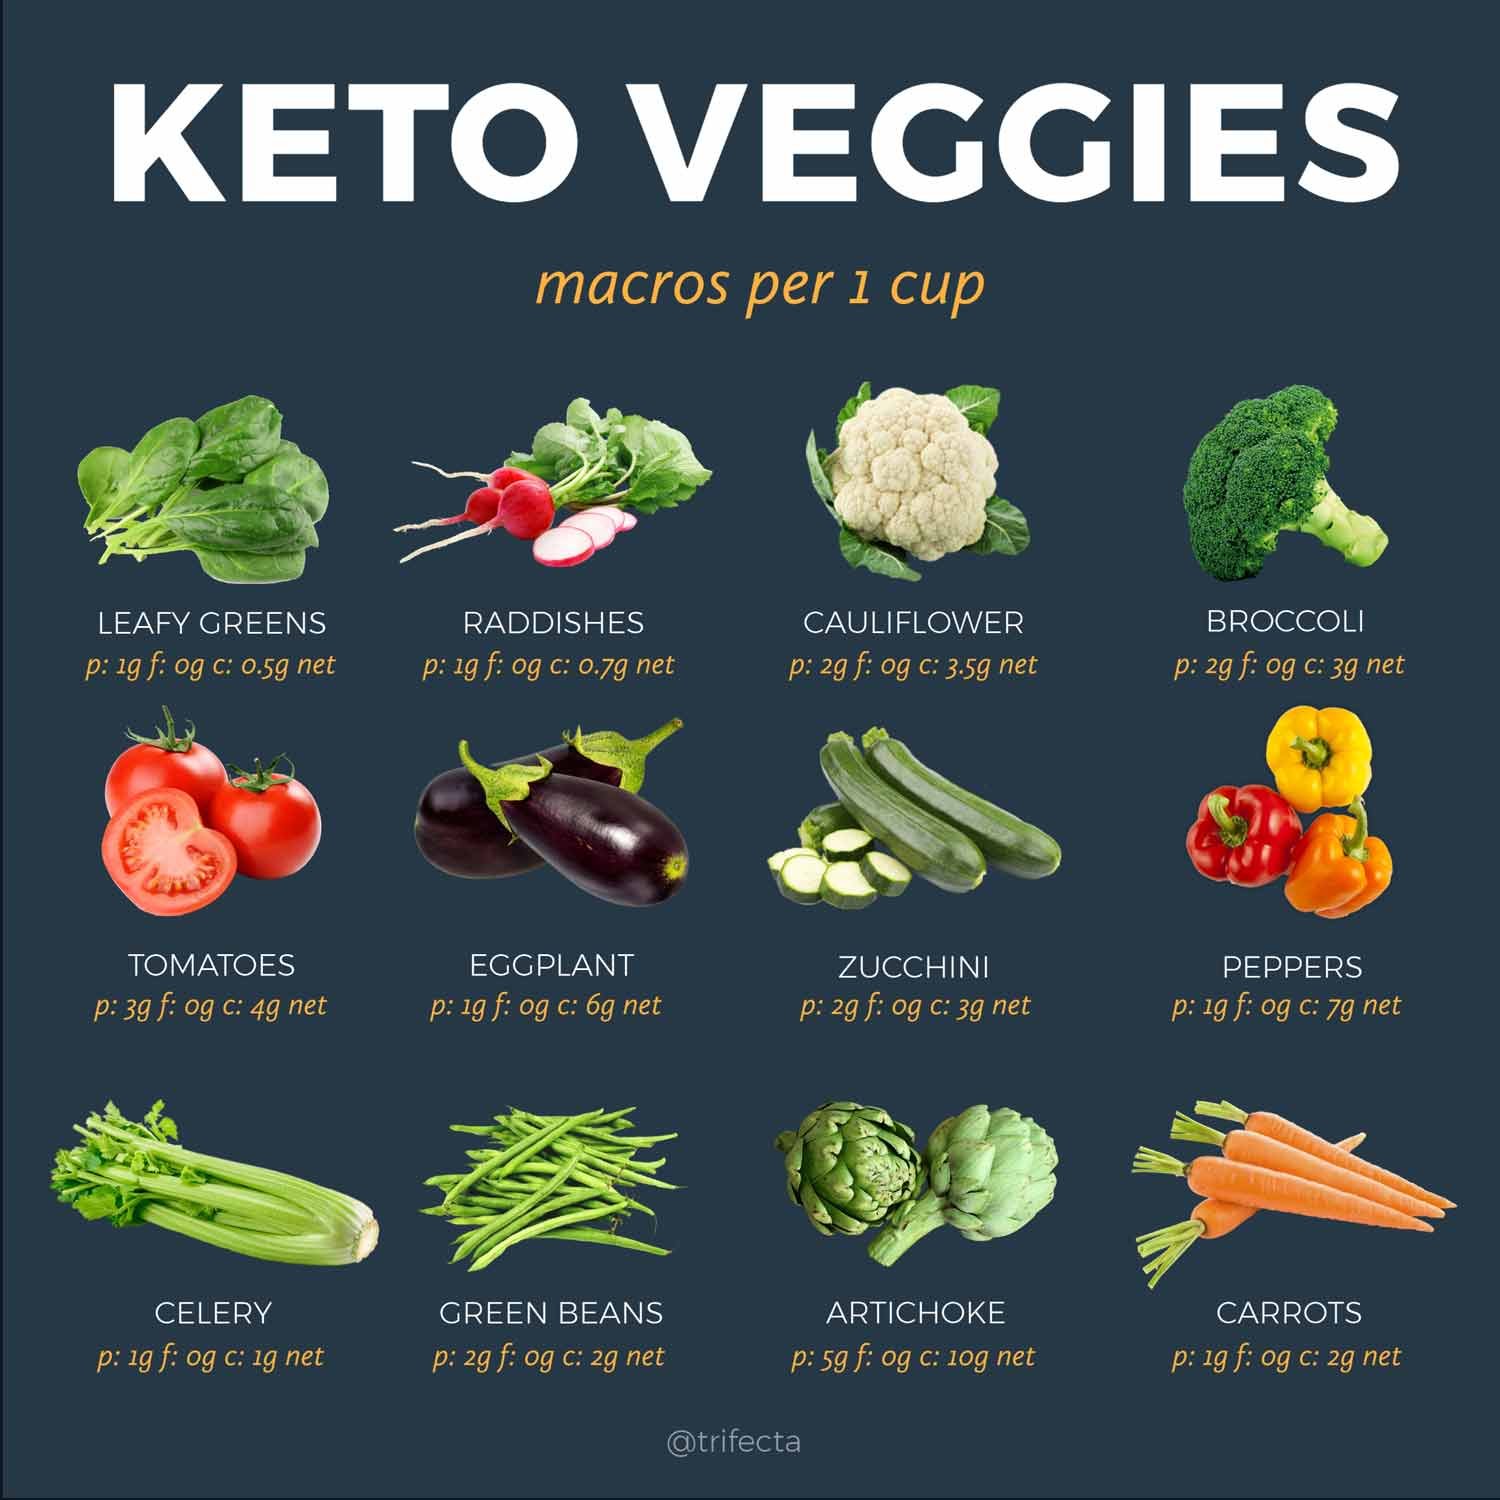 Keto Food List: What to Eat and What to Avoid